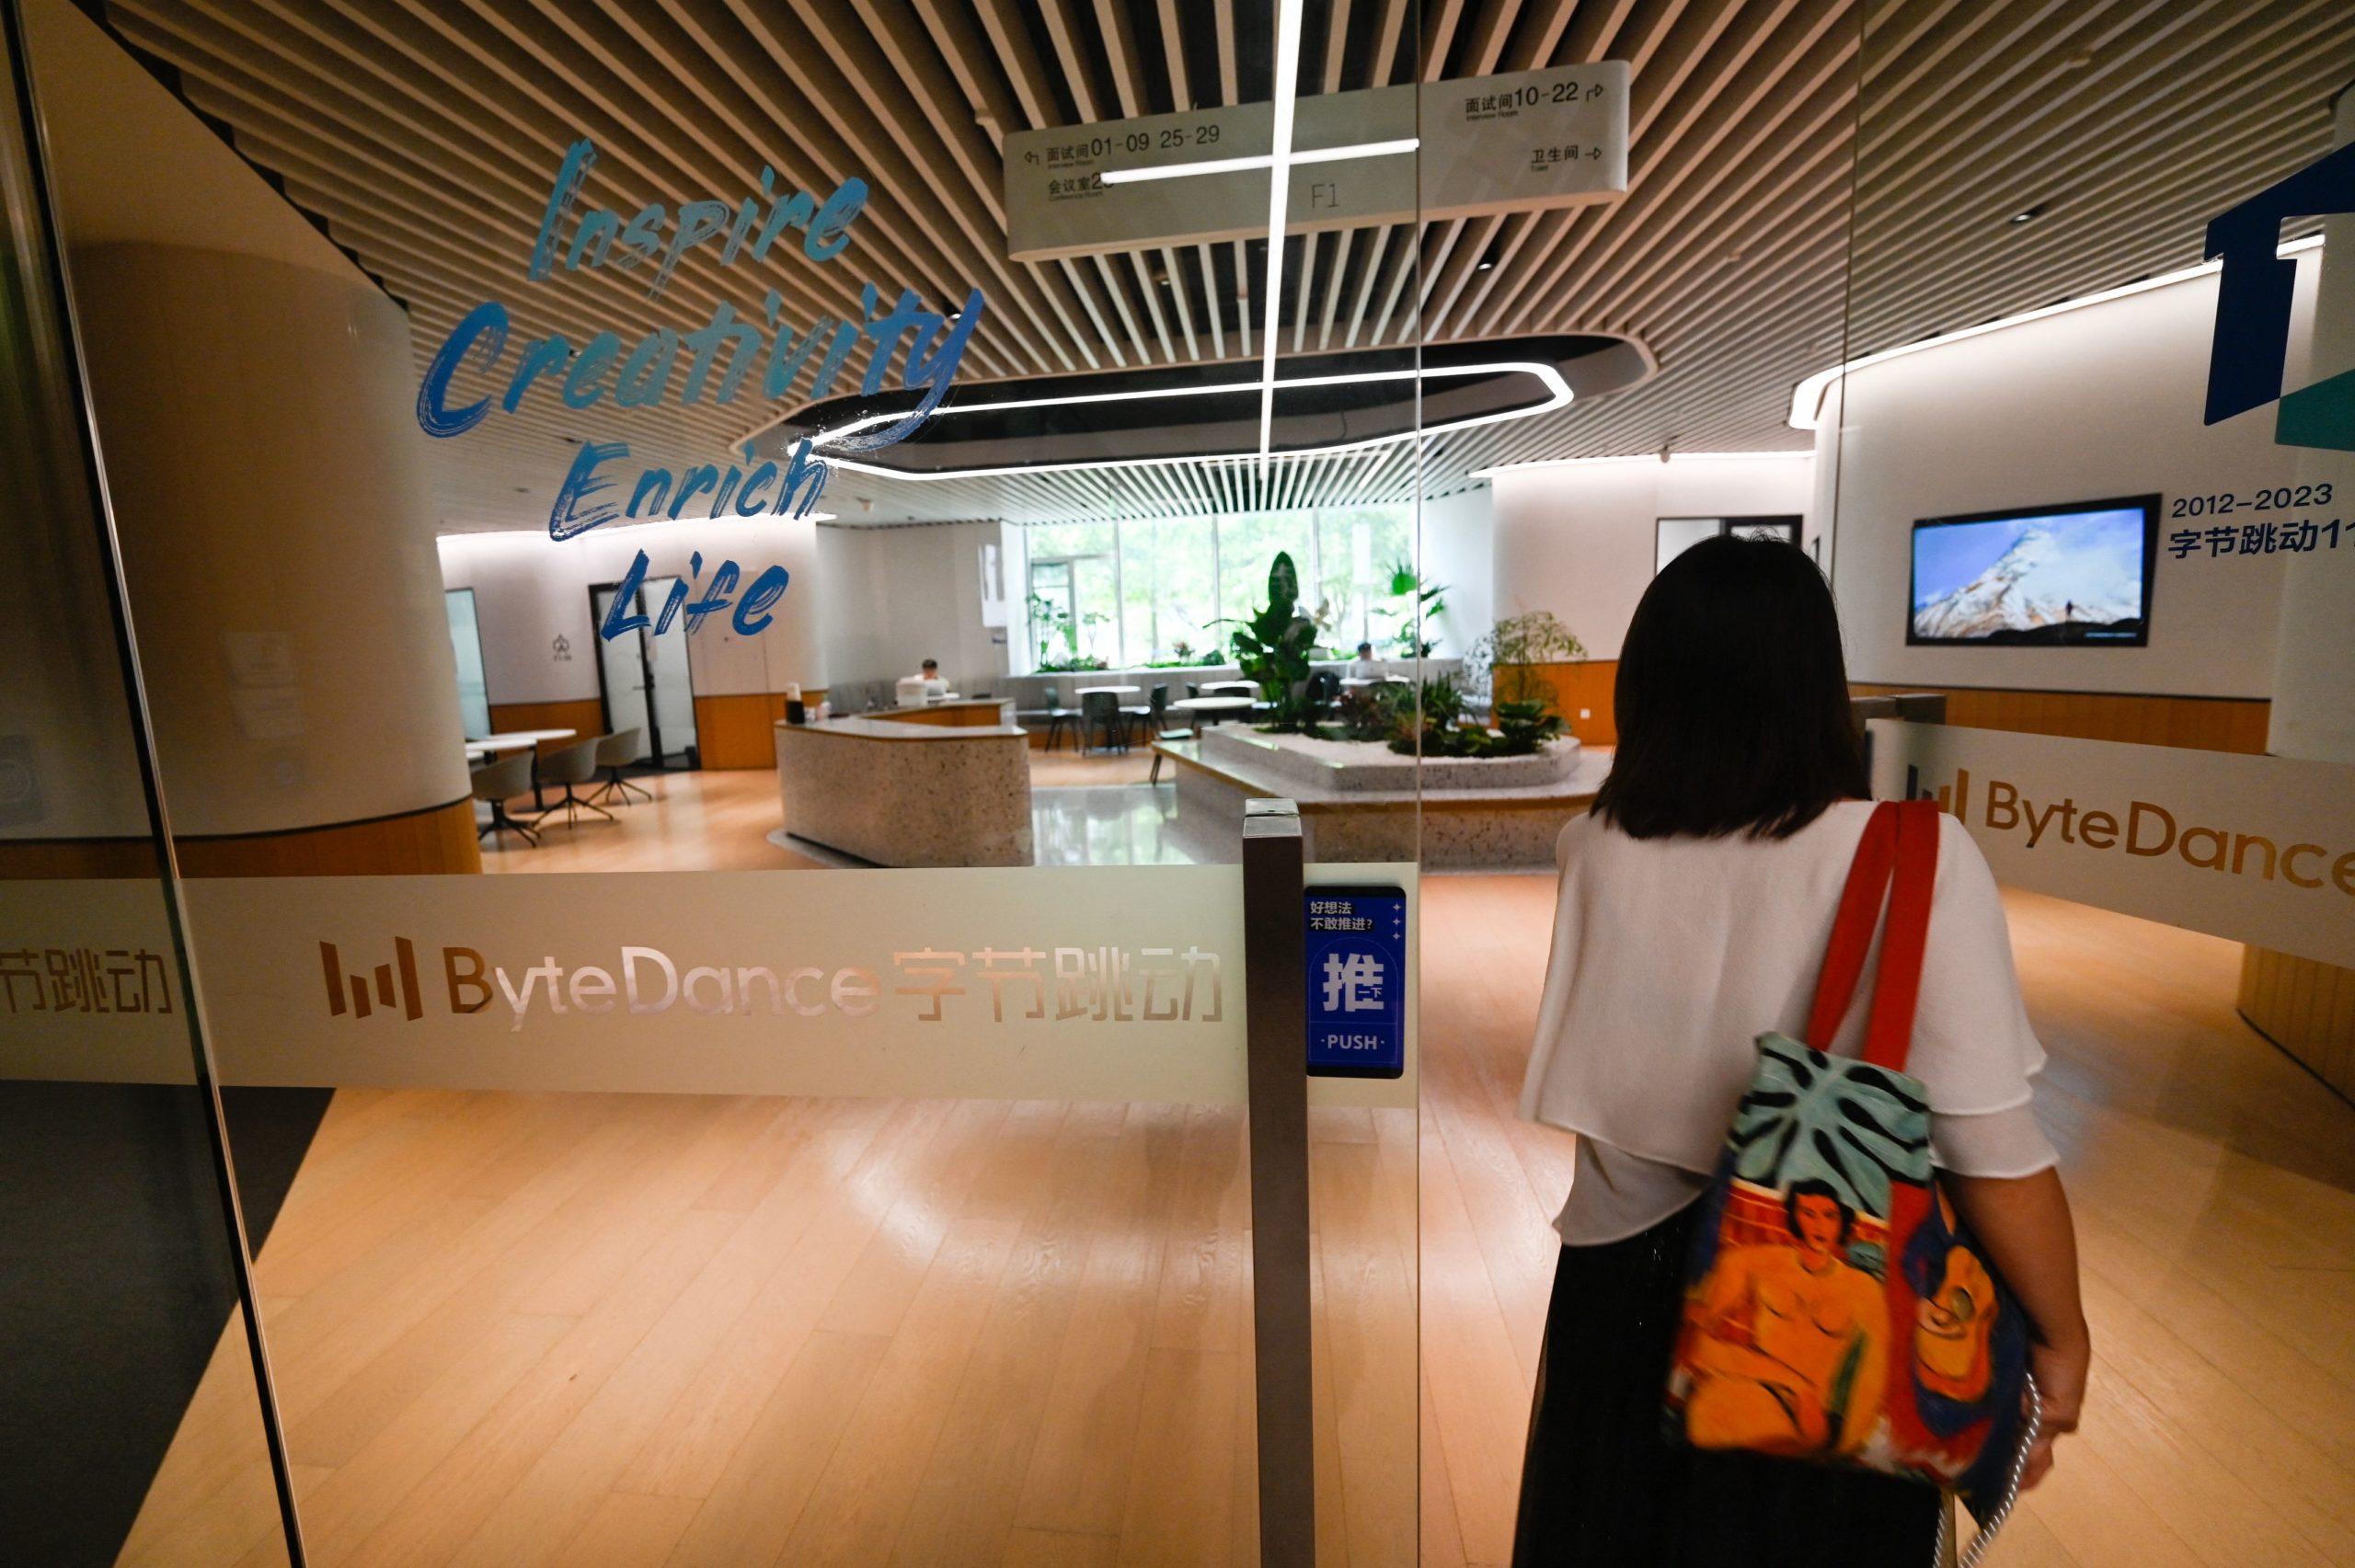 Employees are seen at the ByteDance office in Shanghai on June 27, 2023. (Photo by Pedro PARDO / AFP) (Photo by PEDRO PARDO/AFP via Getty Images)